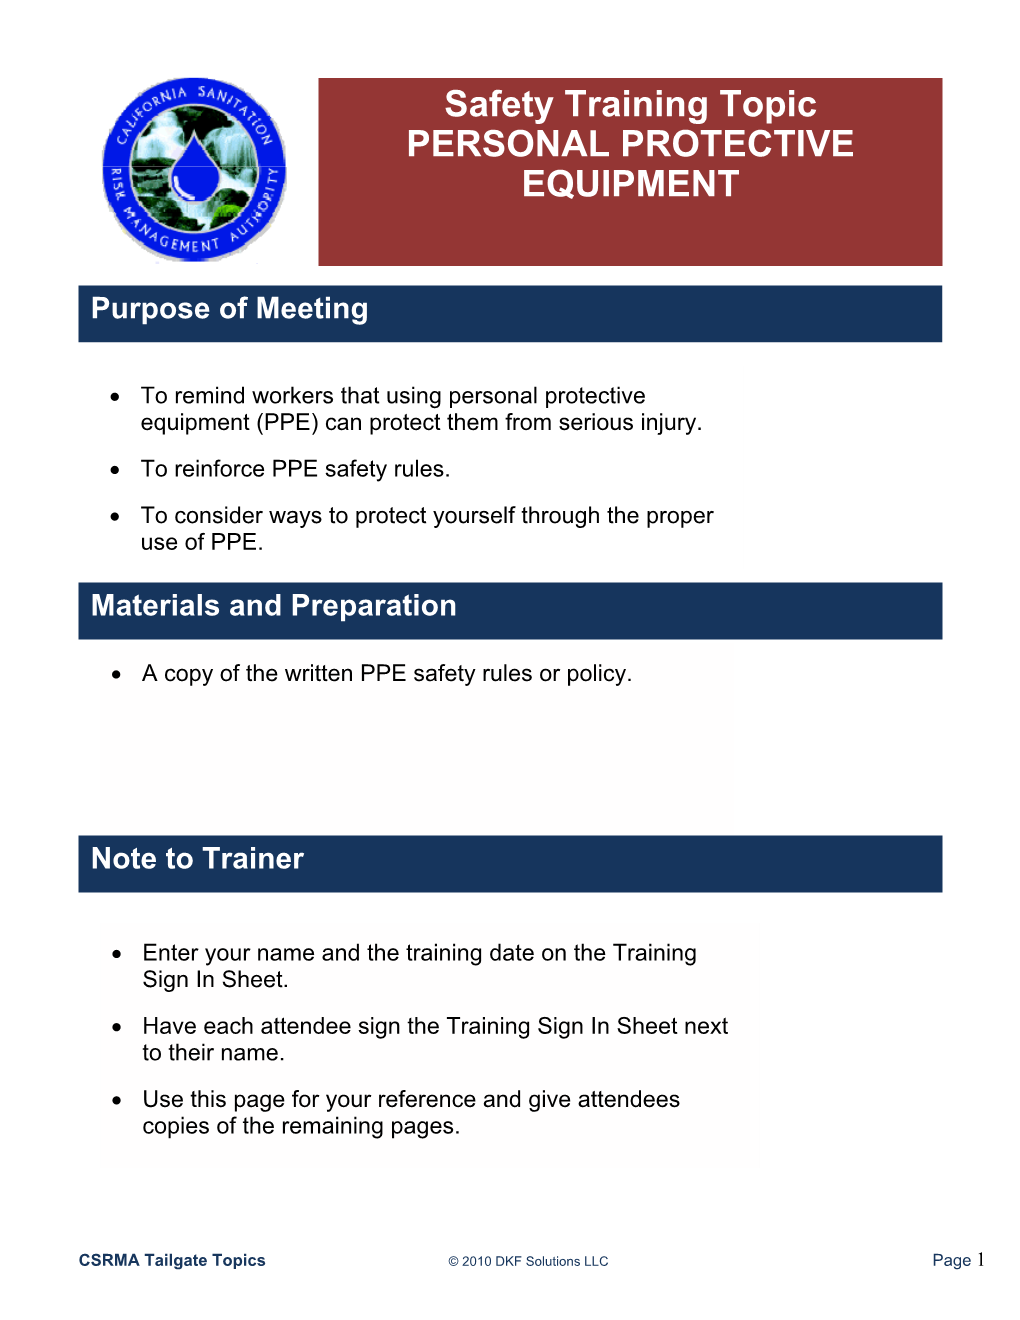 Safety Training Topic PERSONAL PROTECTIVE EQUIPMENT